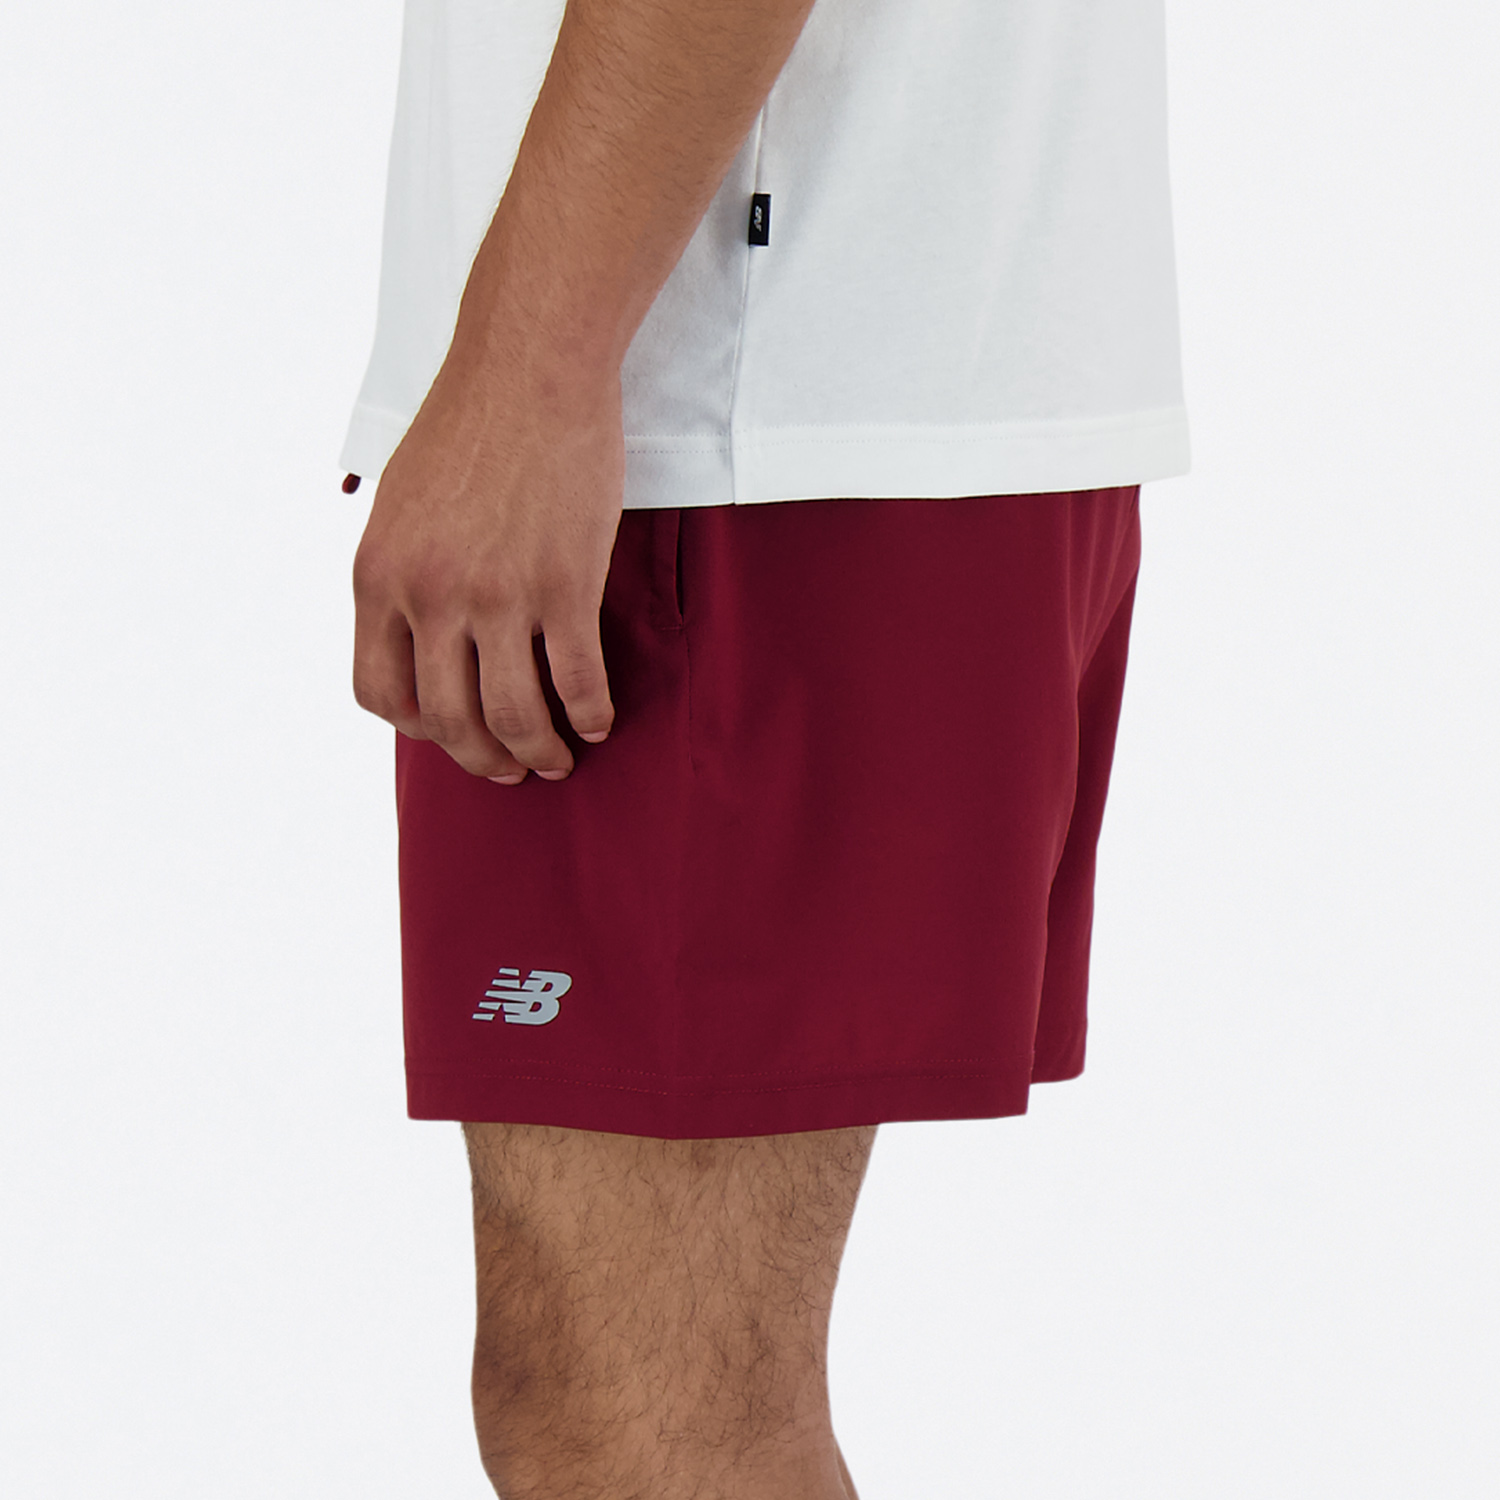 New Balance Performance 5in Shorts - Mineral Red